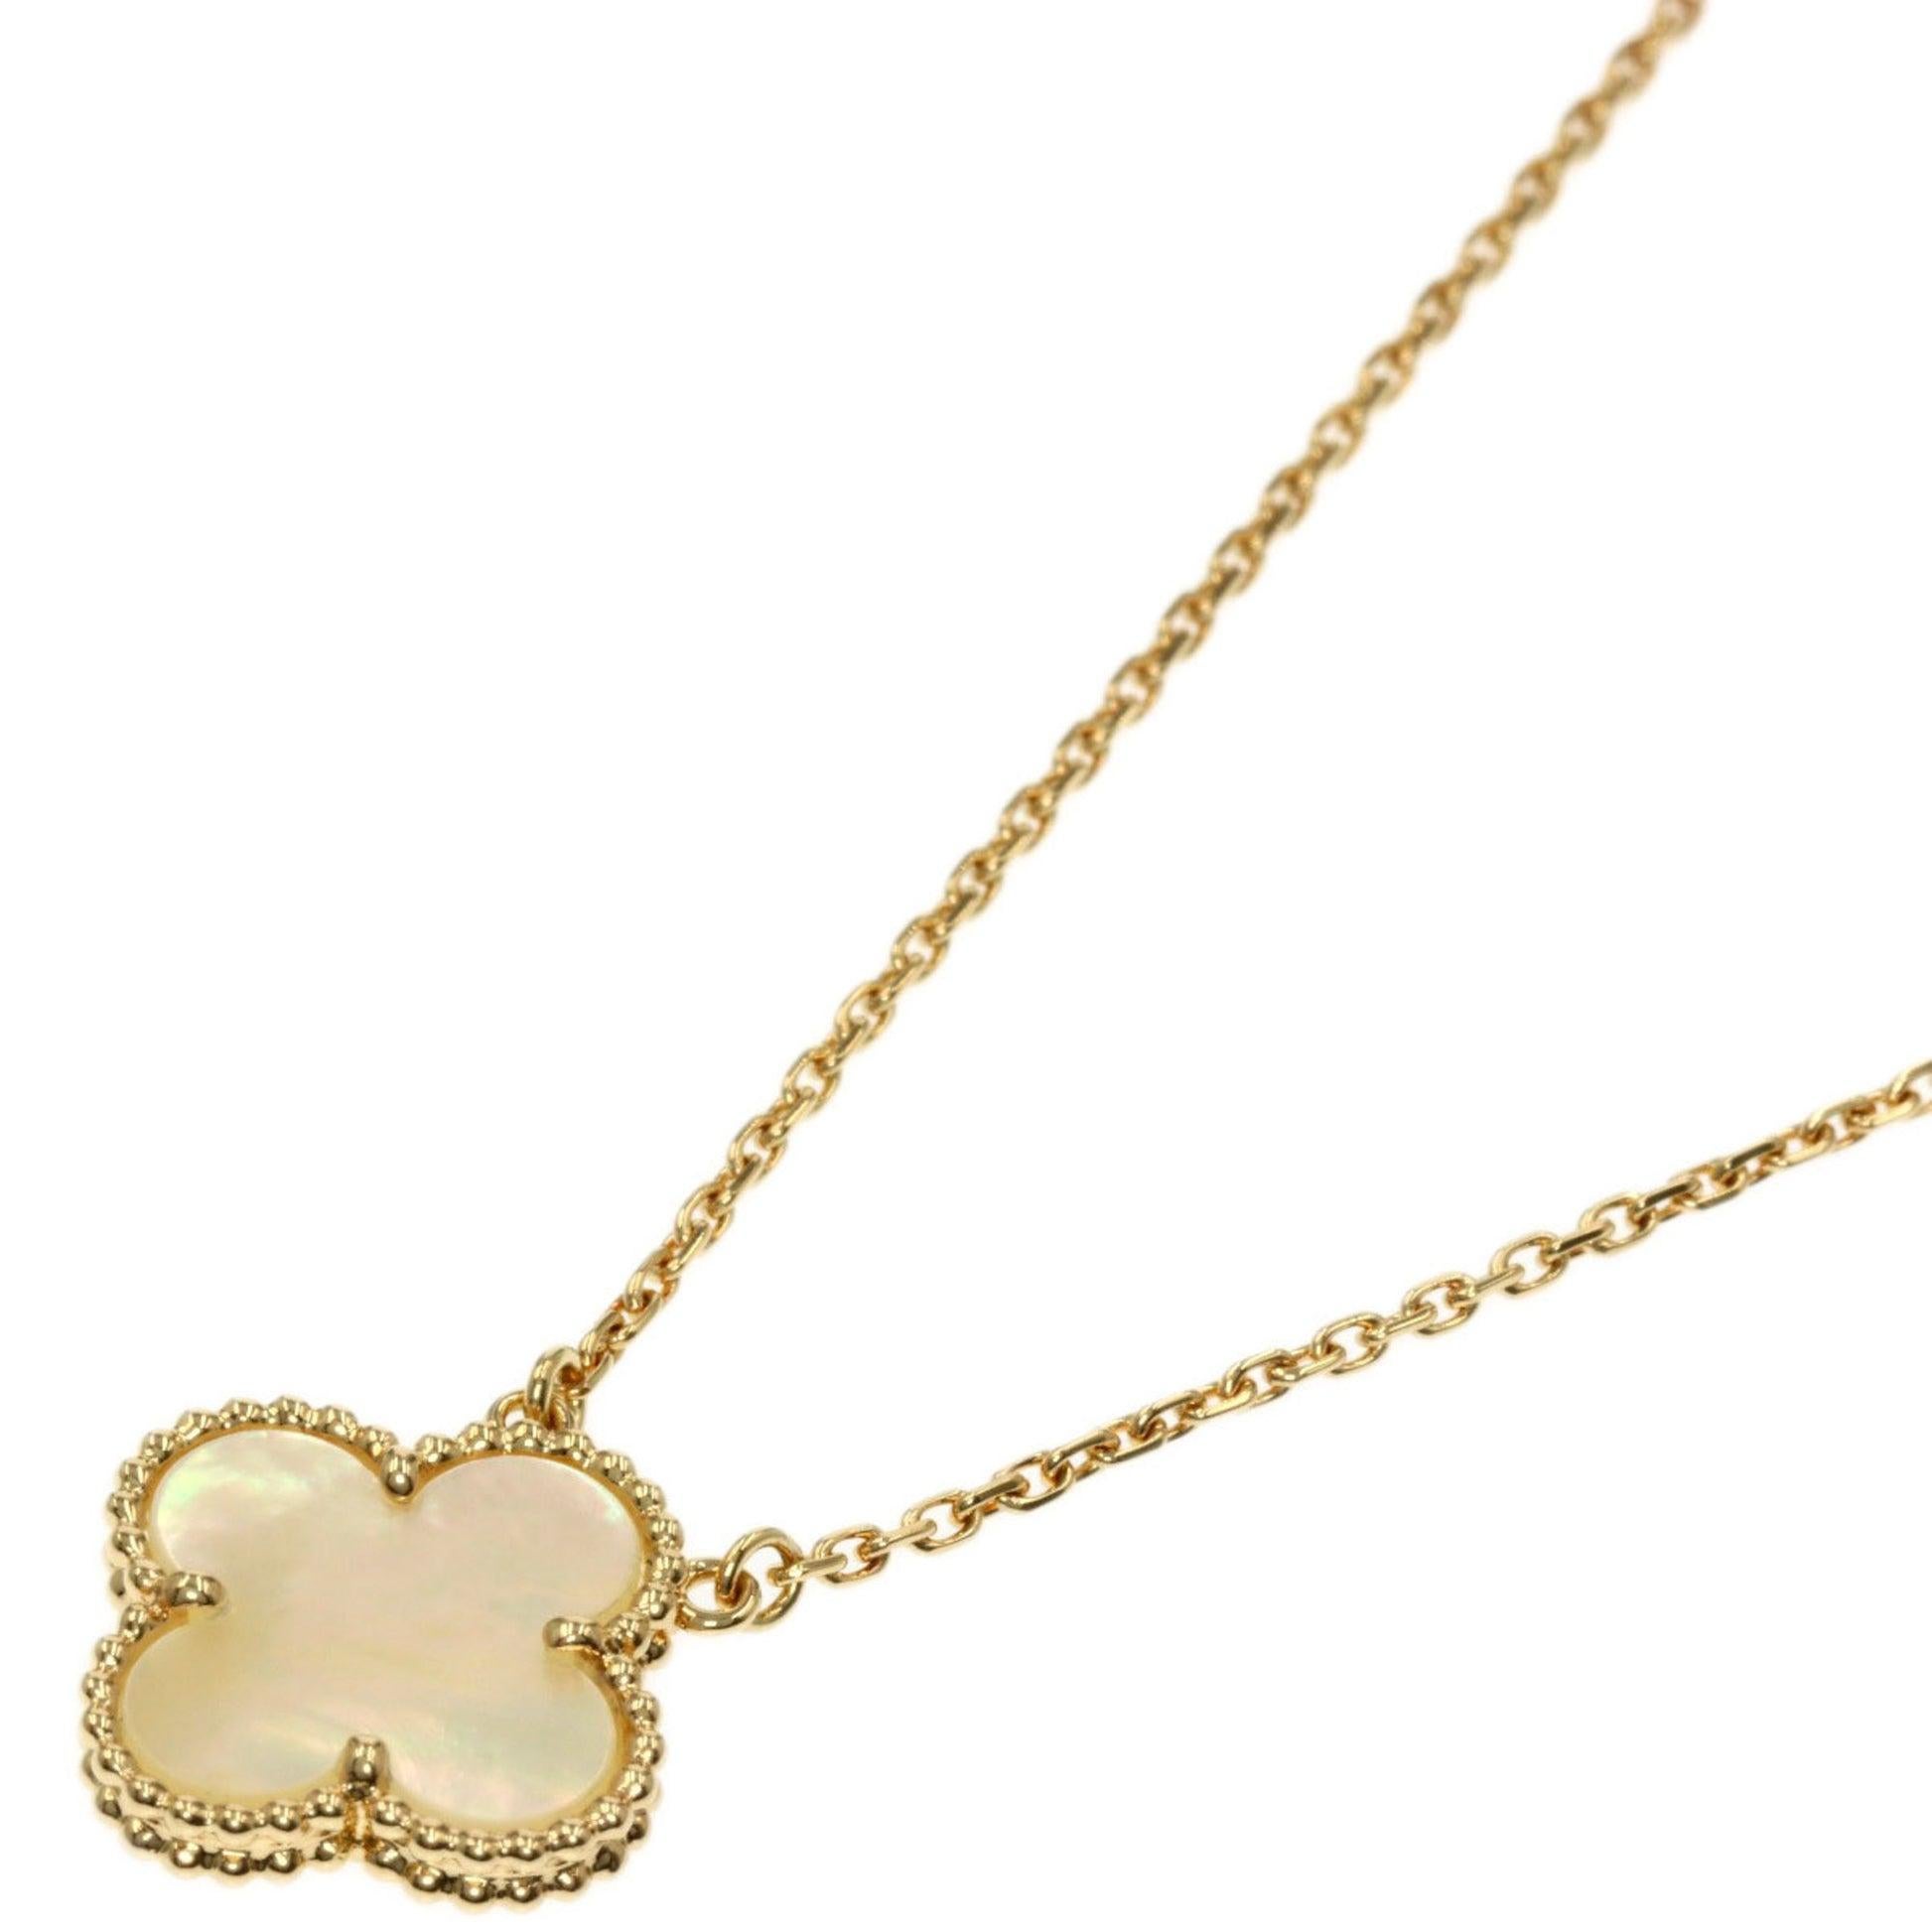 Van Cleef & Arpels Alhambra Necklace in 18K Yellow Gold

Additional Information:
Brand: Van Cleef & Arpels
Gender: Women
Line: Alhambra
Material: Yellow gold (18K)
Condition details: This item has been used and may have some minor flaws. Before